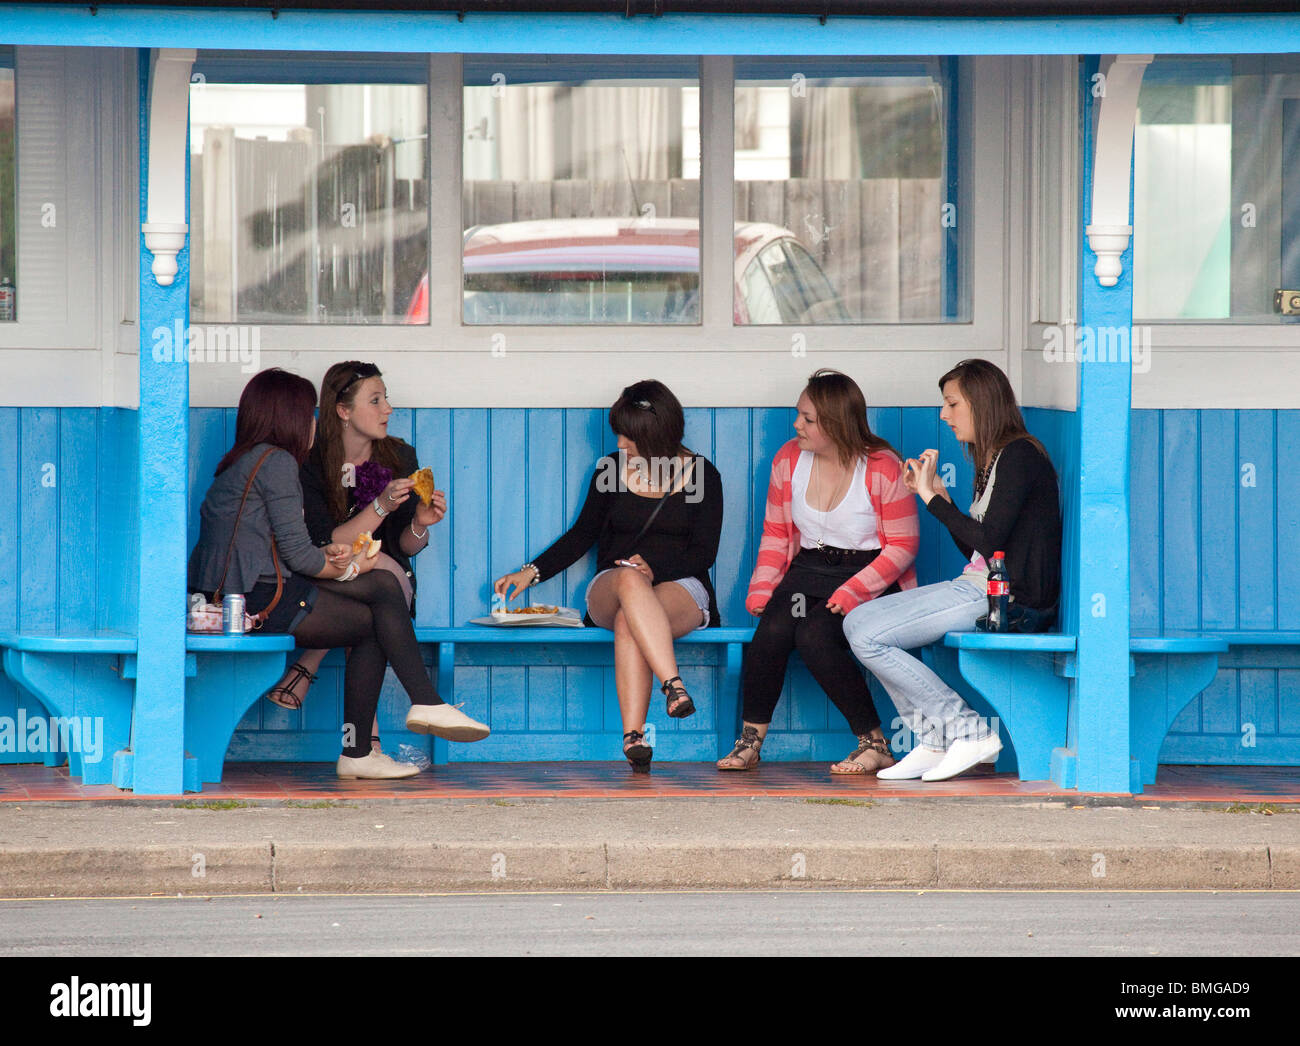 group of young teenage girls in a bus shelter Stock Photo